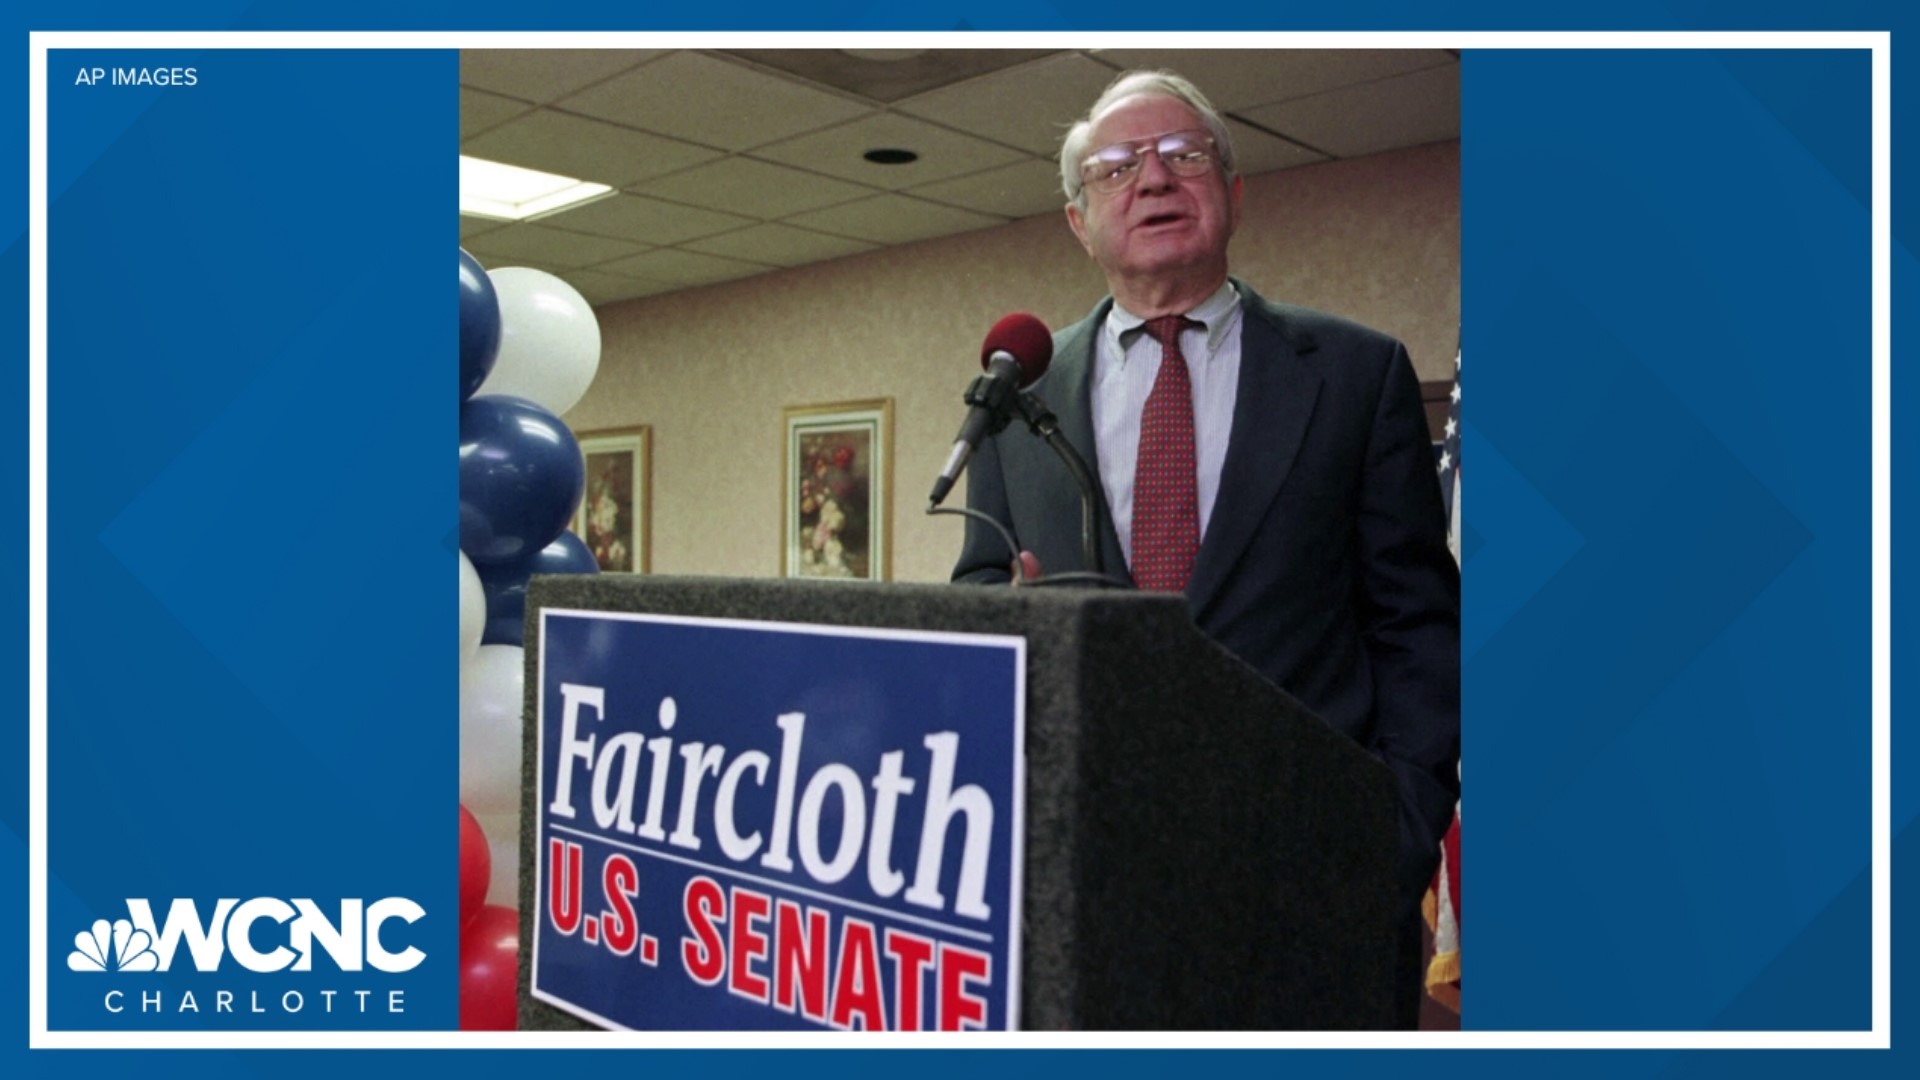 Faircloth, who served one Senate term before losing to then-unknown Democrat John Edwards in 1998, died at his home in Clinton, said Brad Crone.